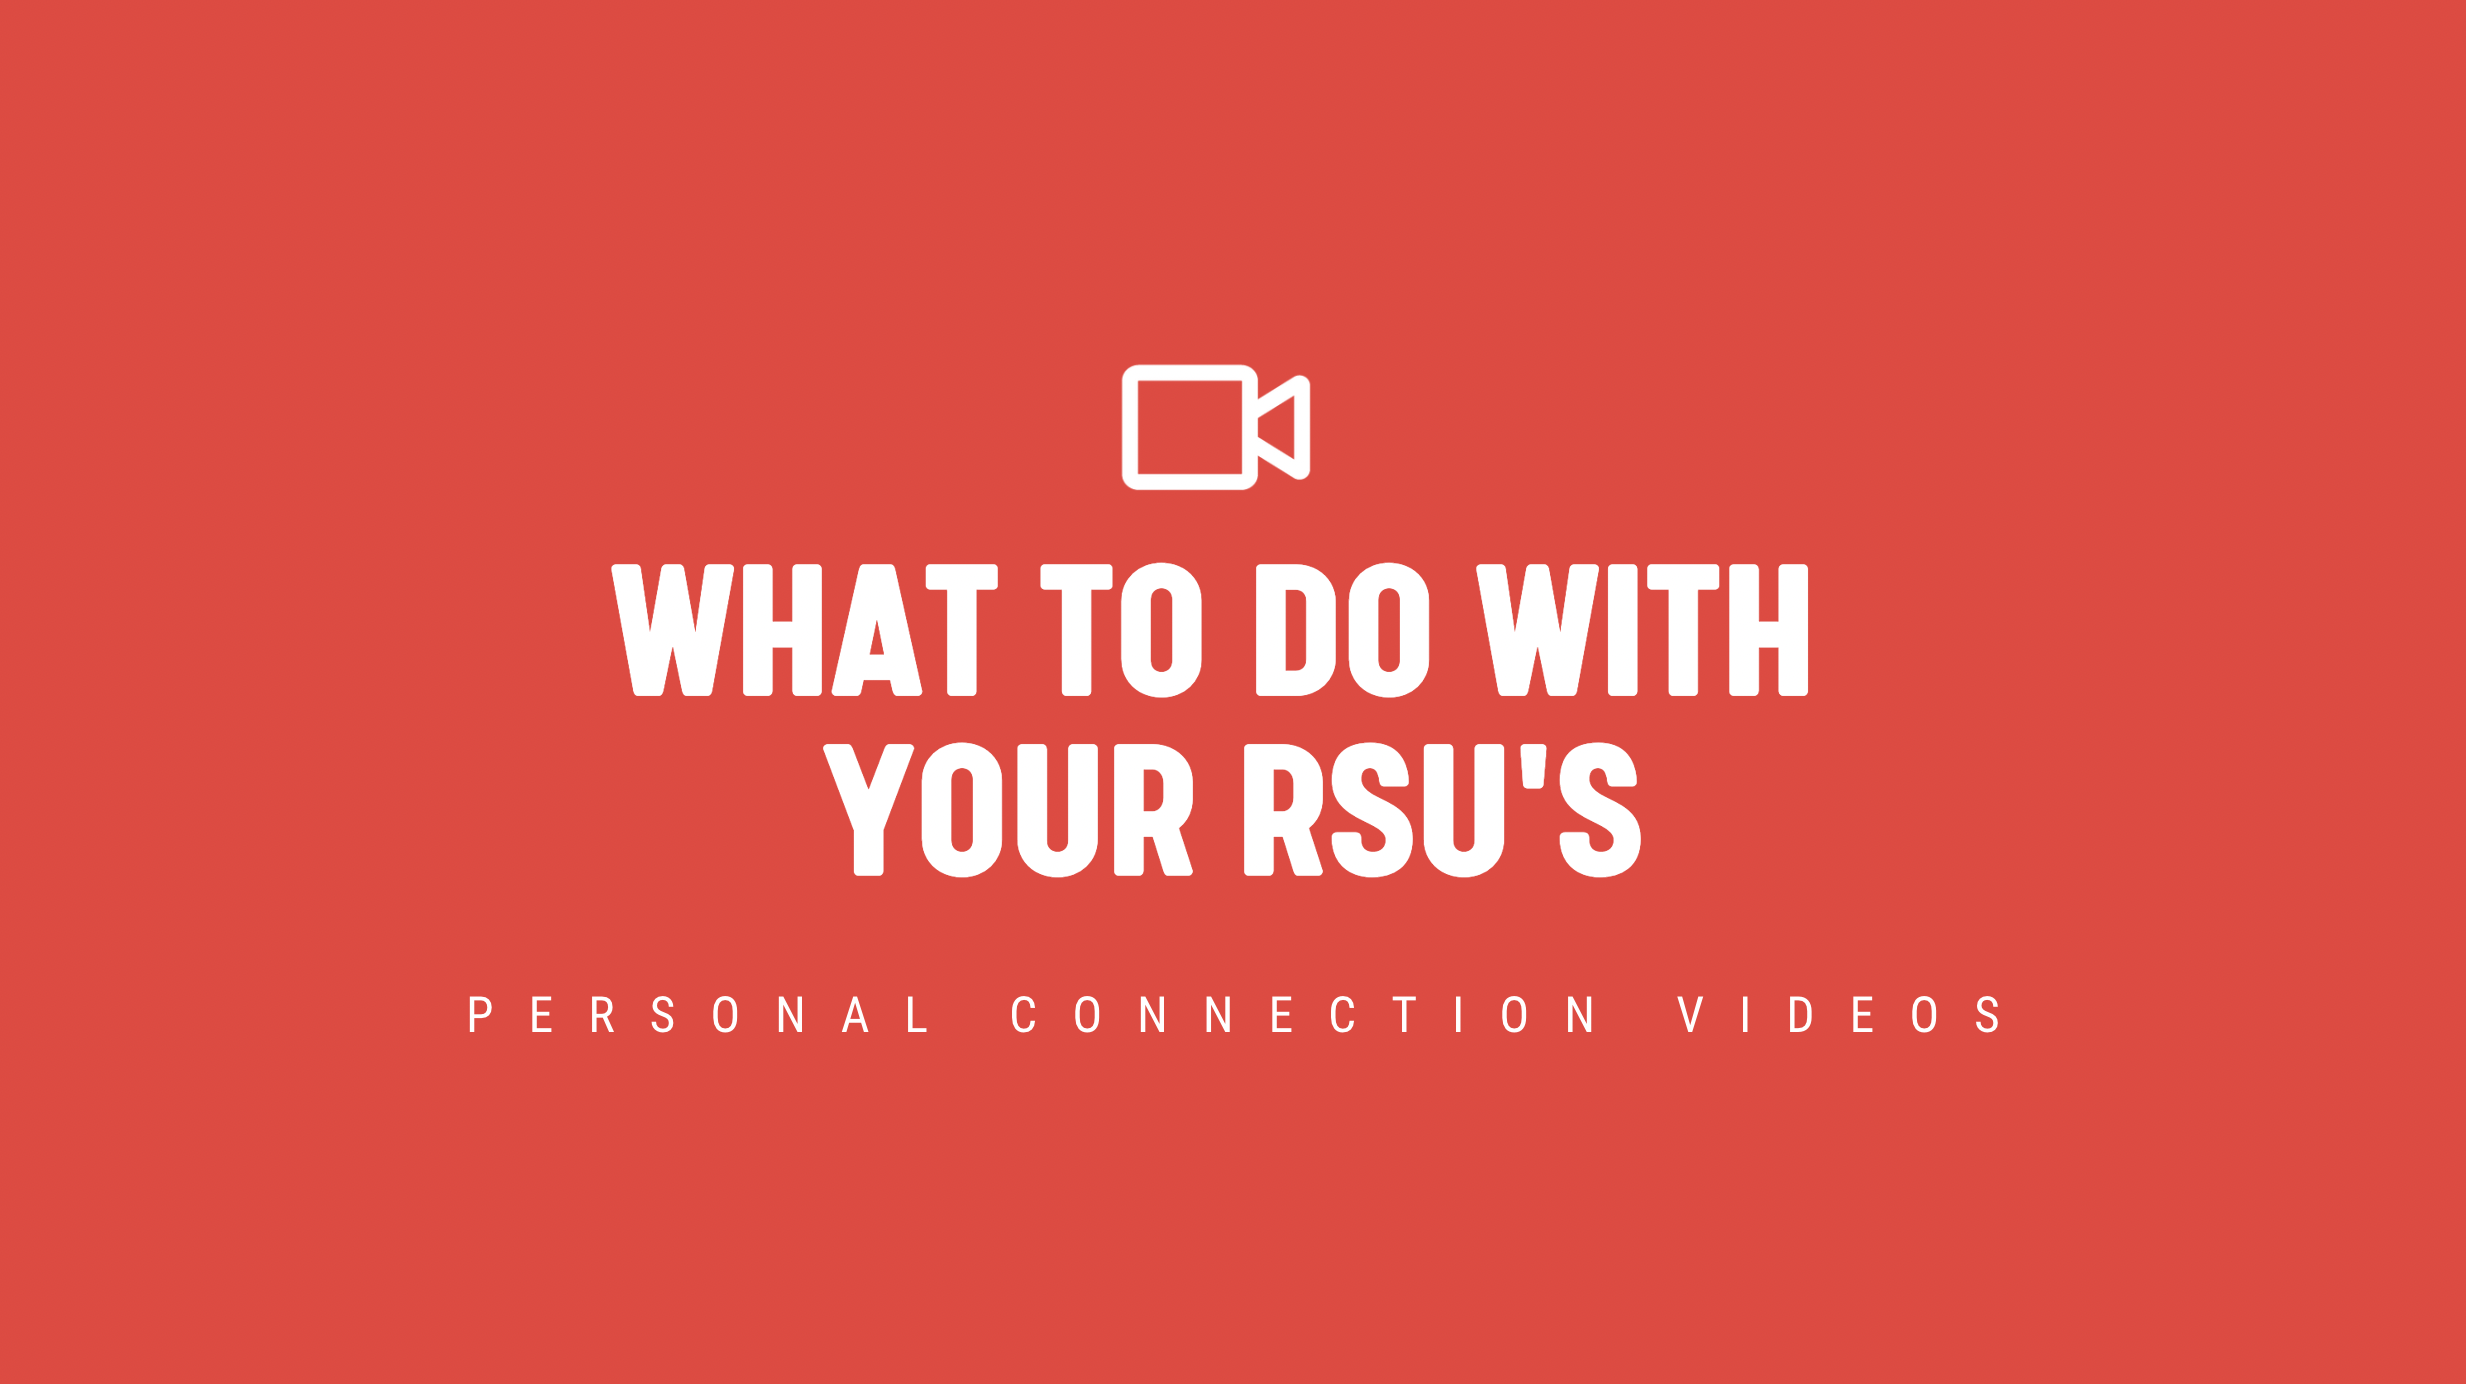 [NEW] What to Do With Your RSU's - Personal Connection Video